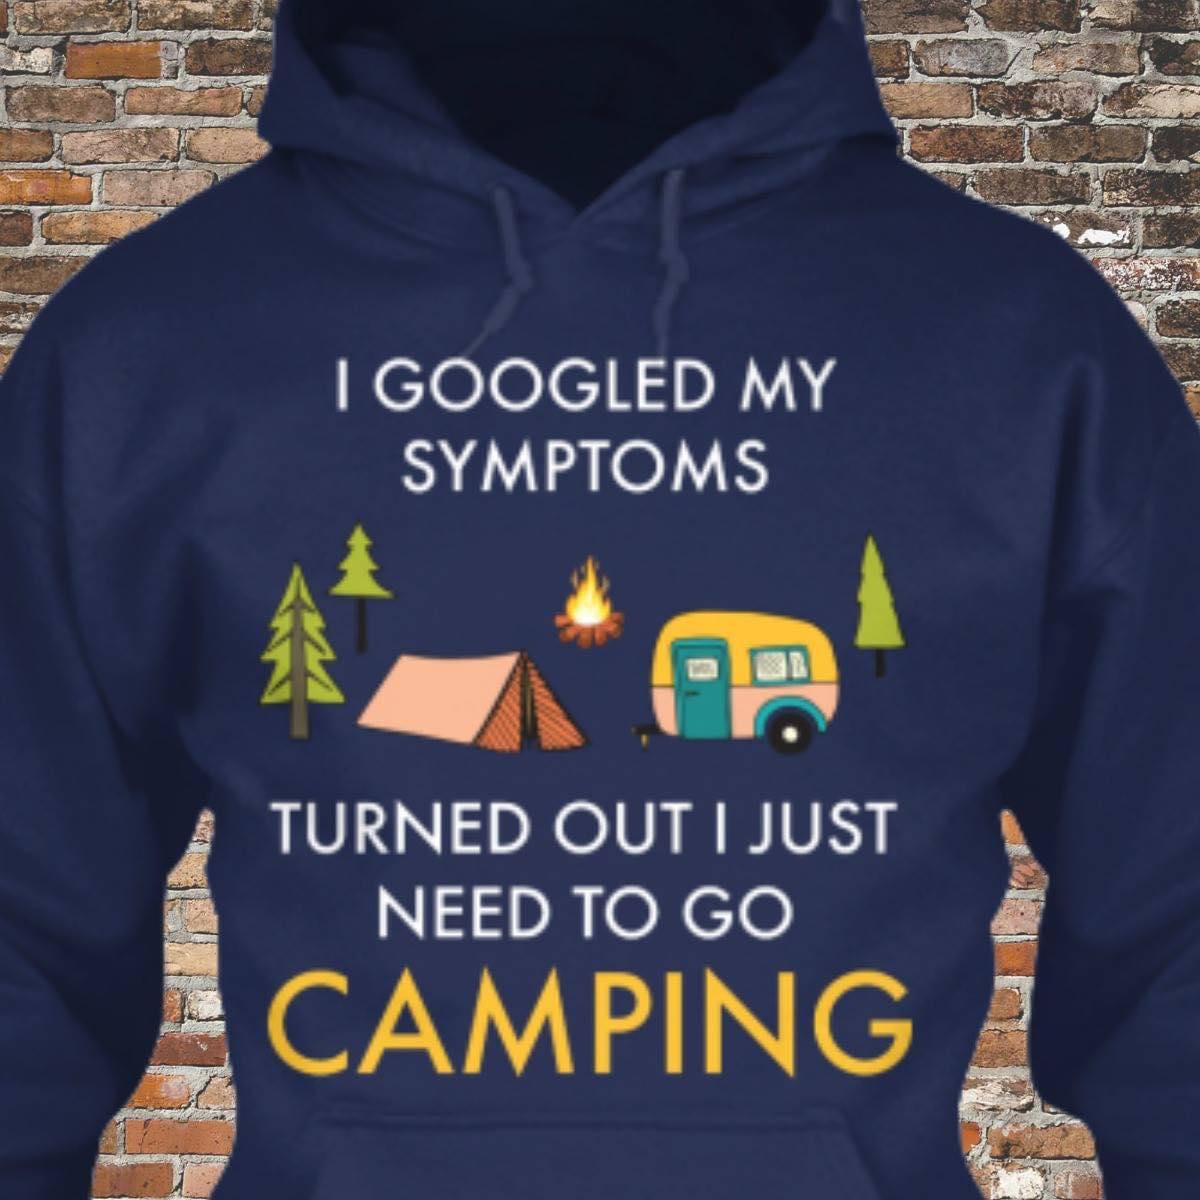 I googled my symptoms turned out I just need to go camping